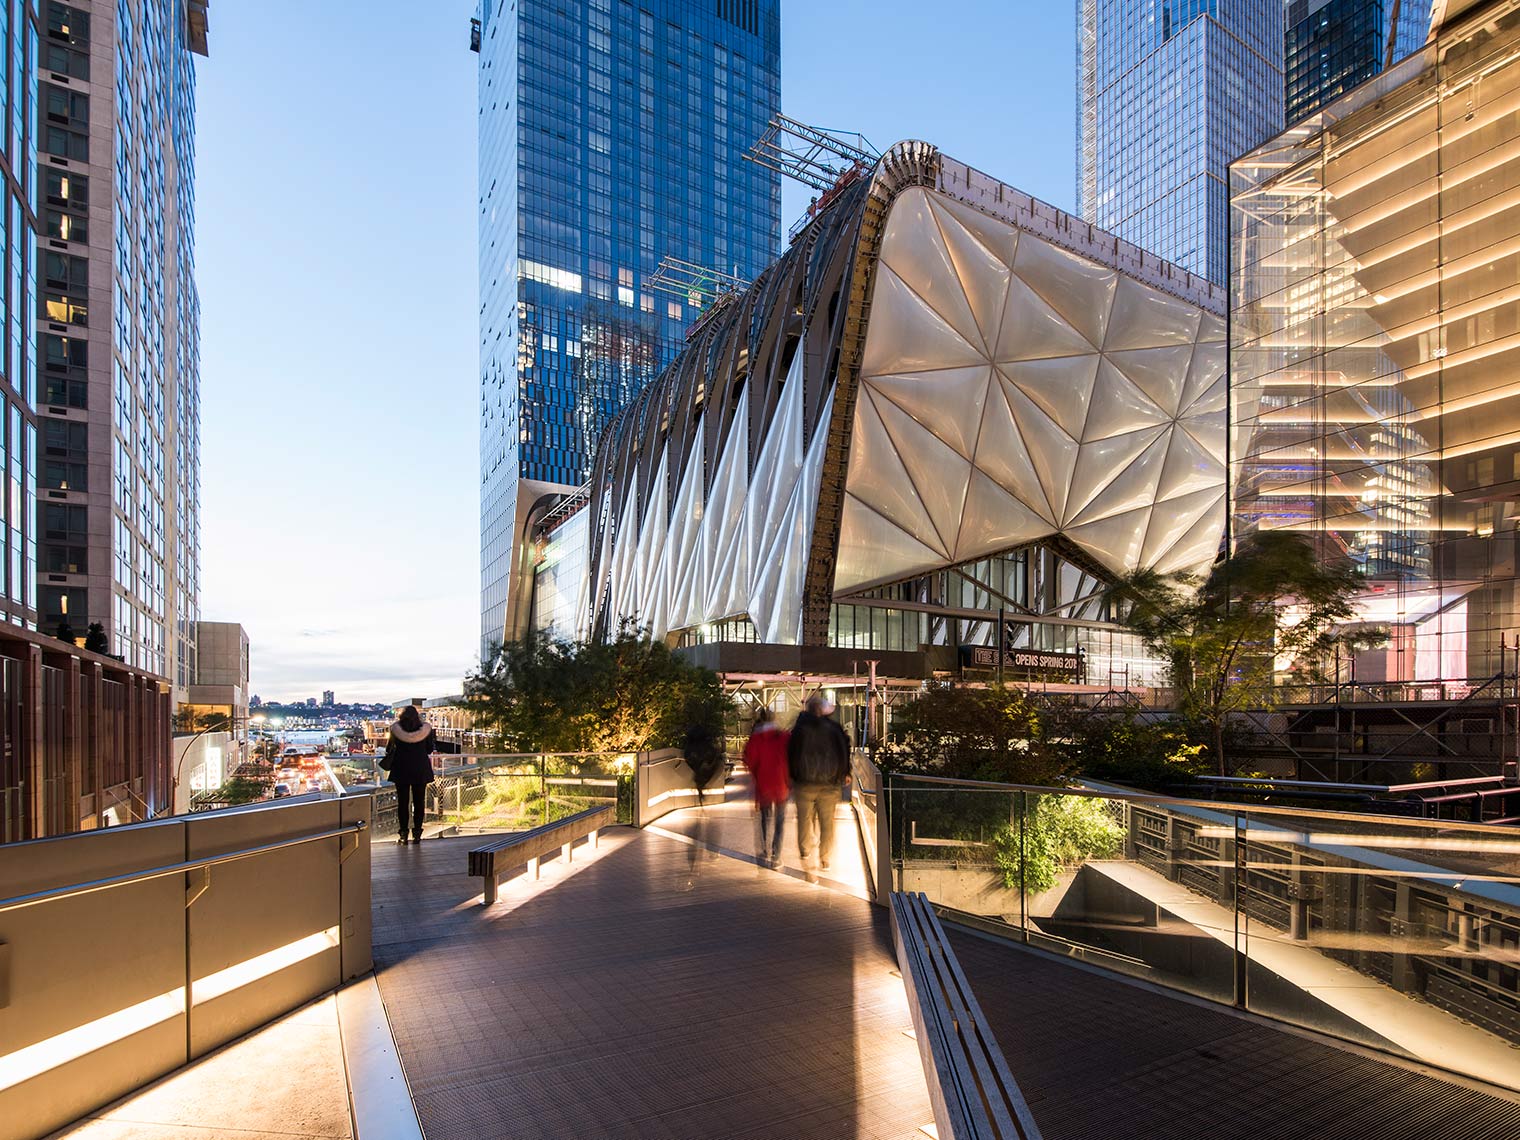 The Shed - Designed by Diller Scofidio + Renfro